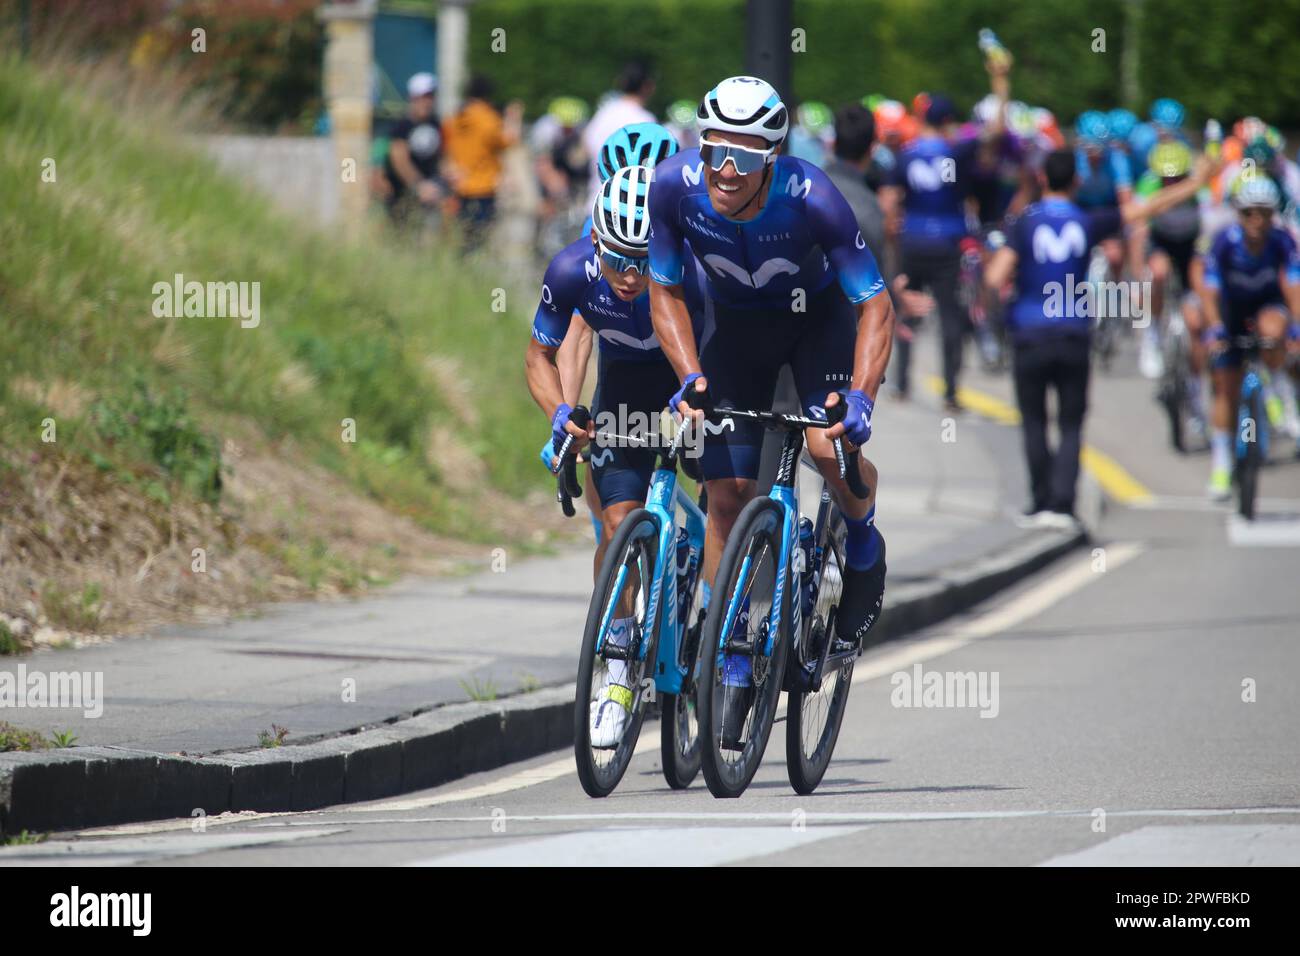 Oviedo, Spain, 30th April, 2023: Movistar Team rider Alberto Torres (R) followed by Einer Augusto Rubio (Movistar Team, L) leading a group during the 3rd stage of the Vuelta a Asturias 2023 between Cangas del Narcea and Oviedo , on April 30, 2023, in Oviedo, Spain. Credit: Alberto Brevers / Alamy Live News Stock Photo